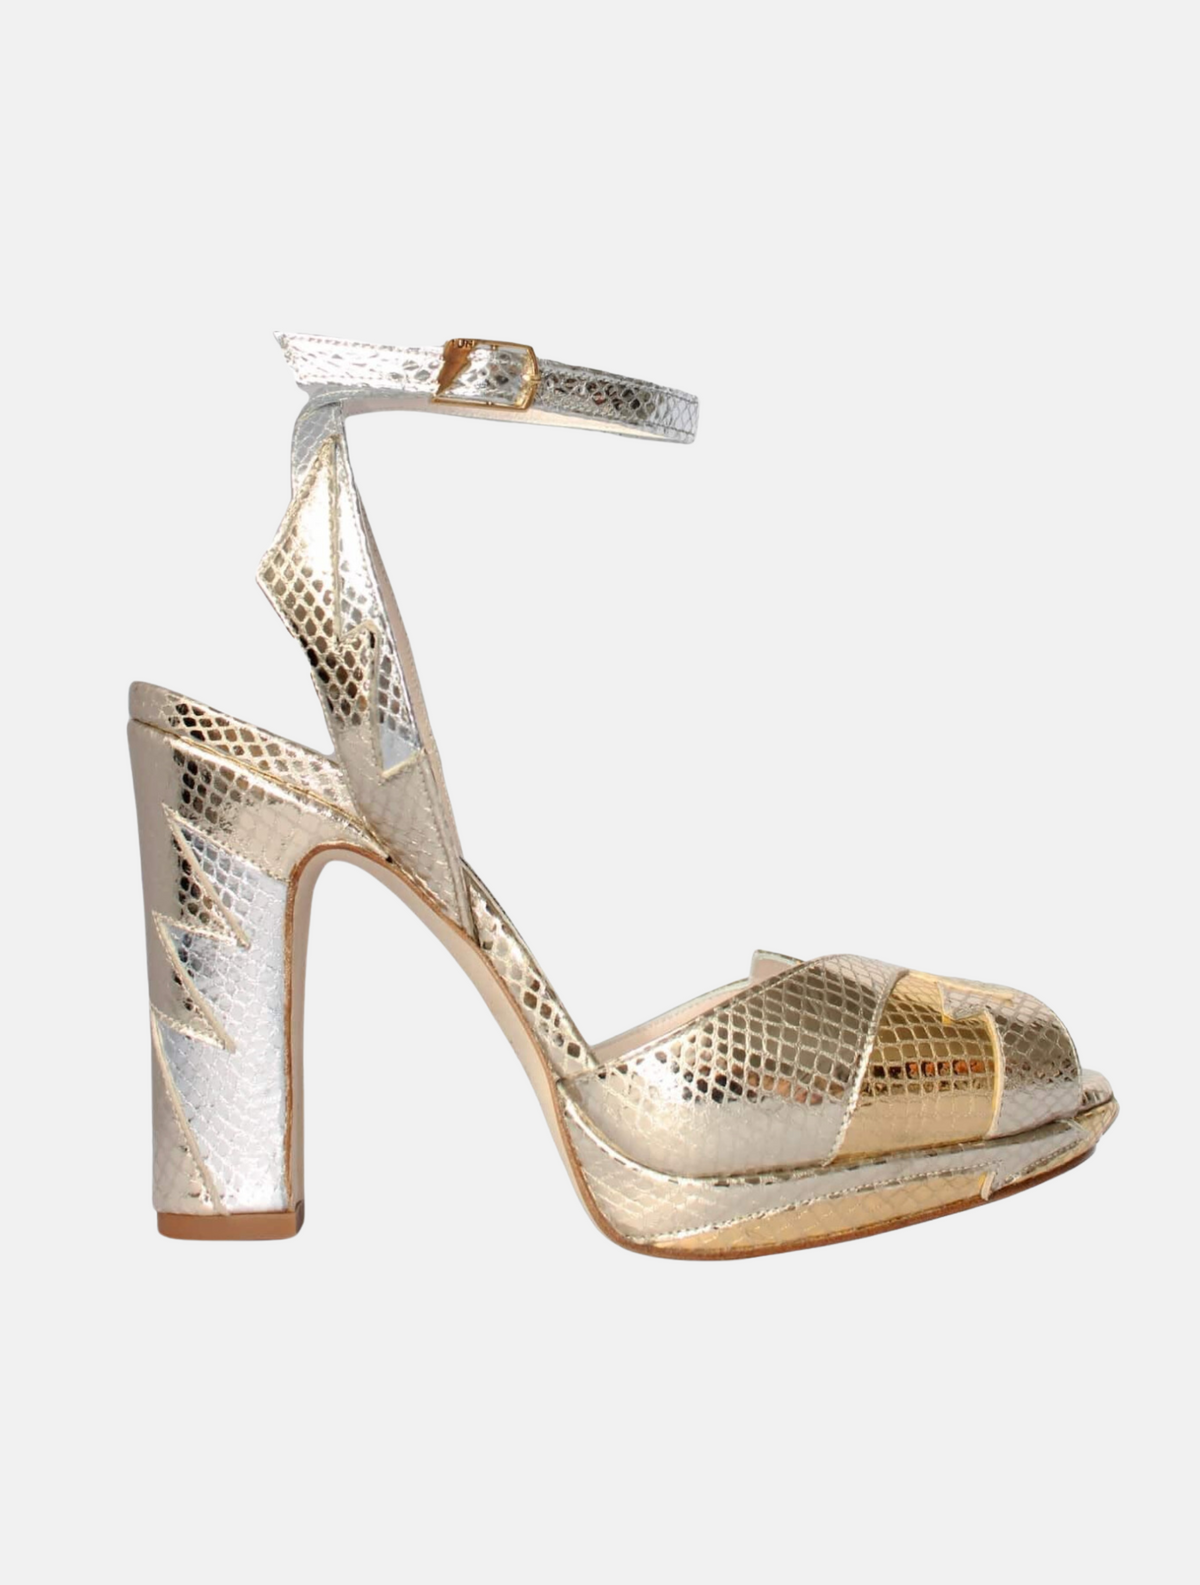 Silver and gold mock-snake platform toeless sandals with ankle strap and block heel